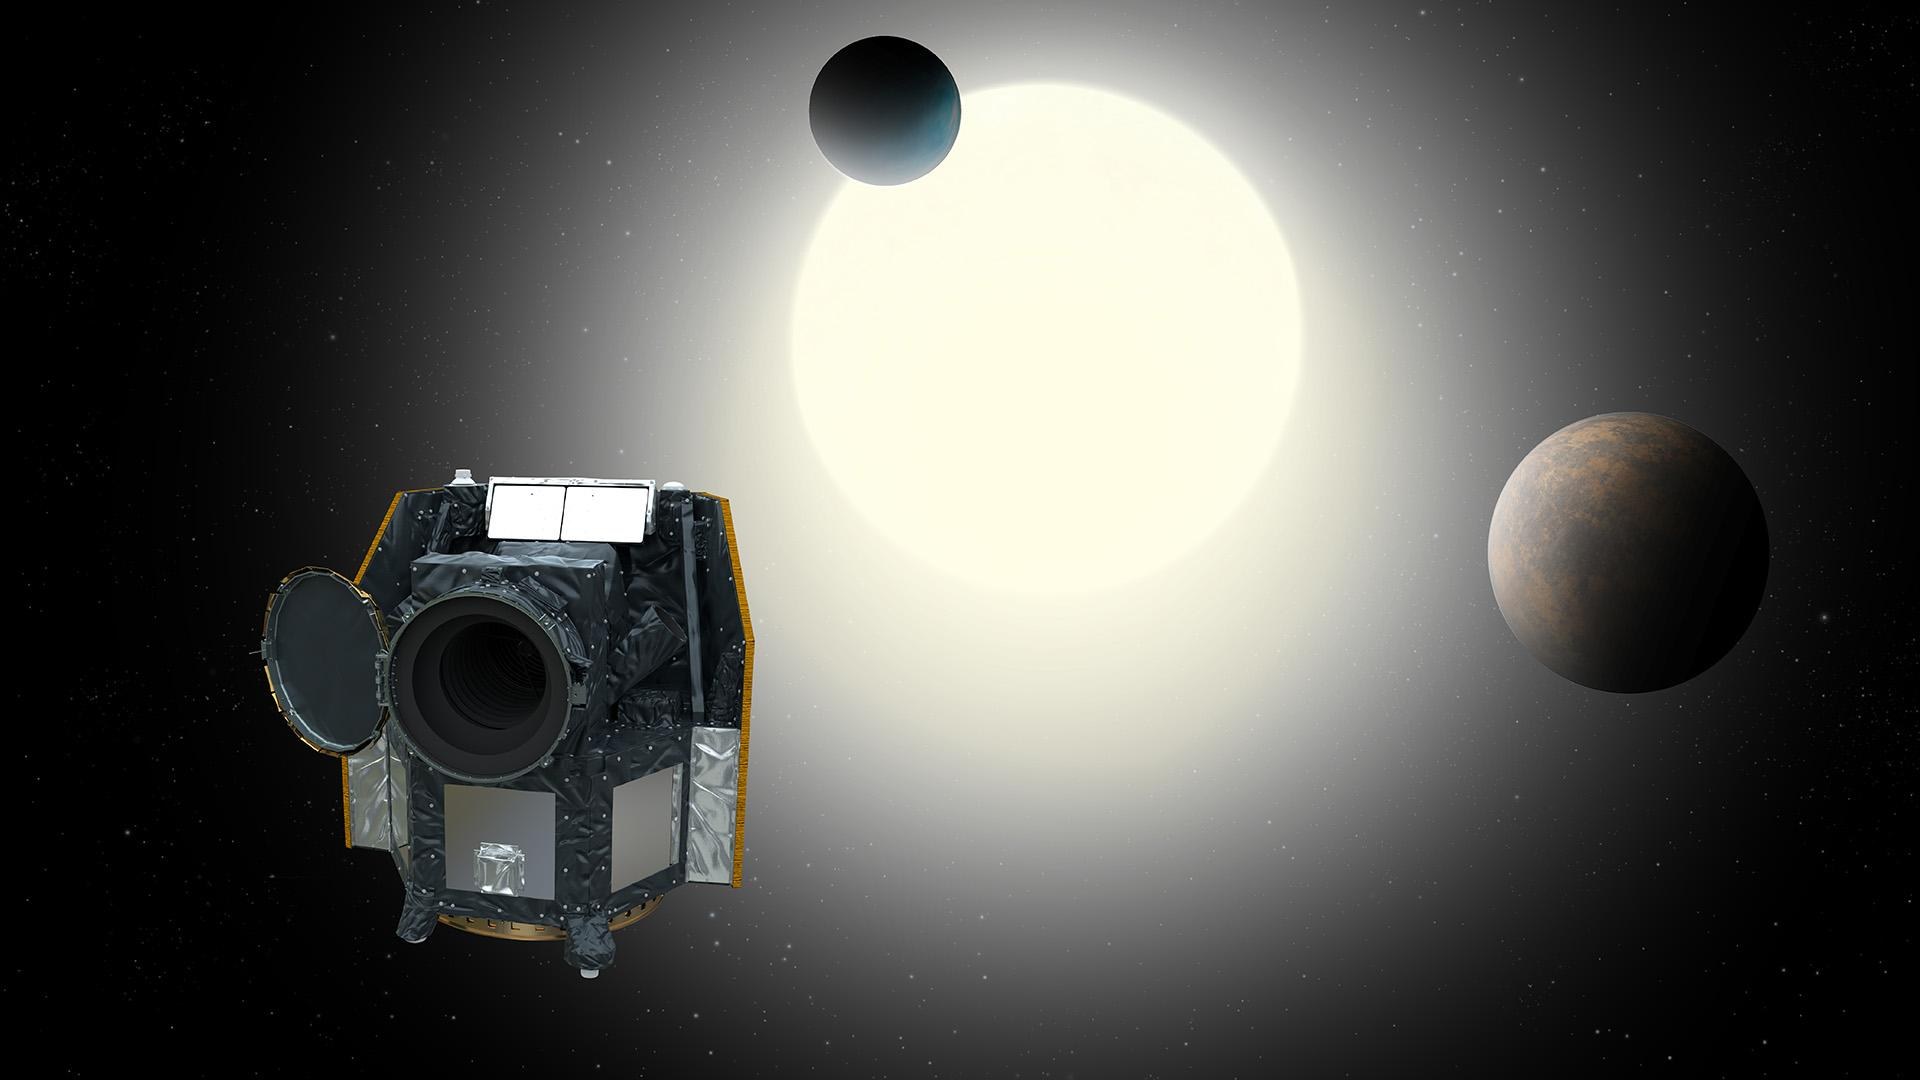 CHEOPS mission to characterise exoplanets